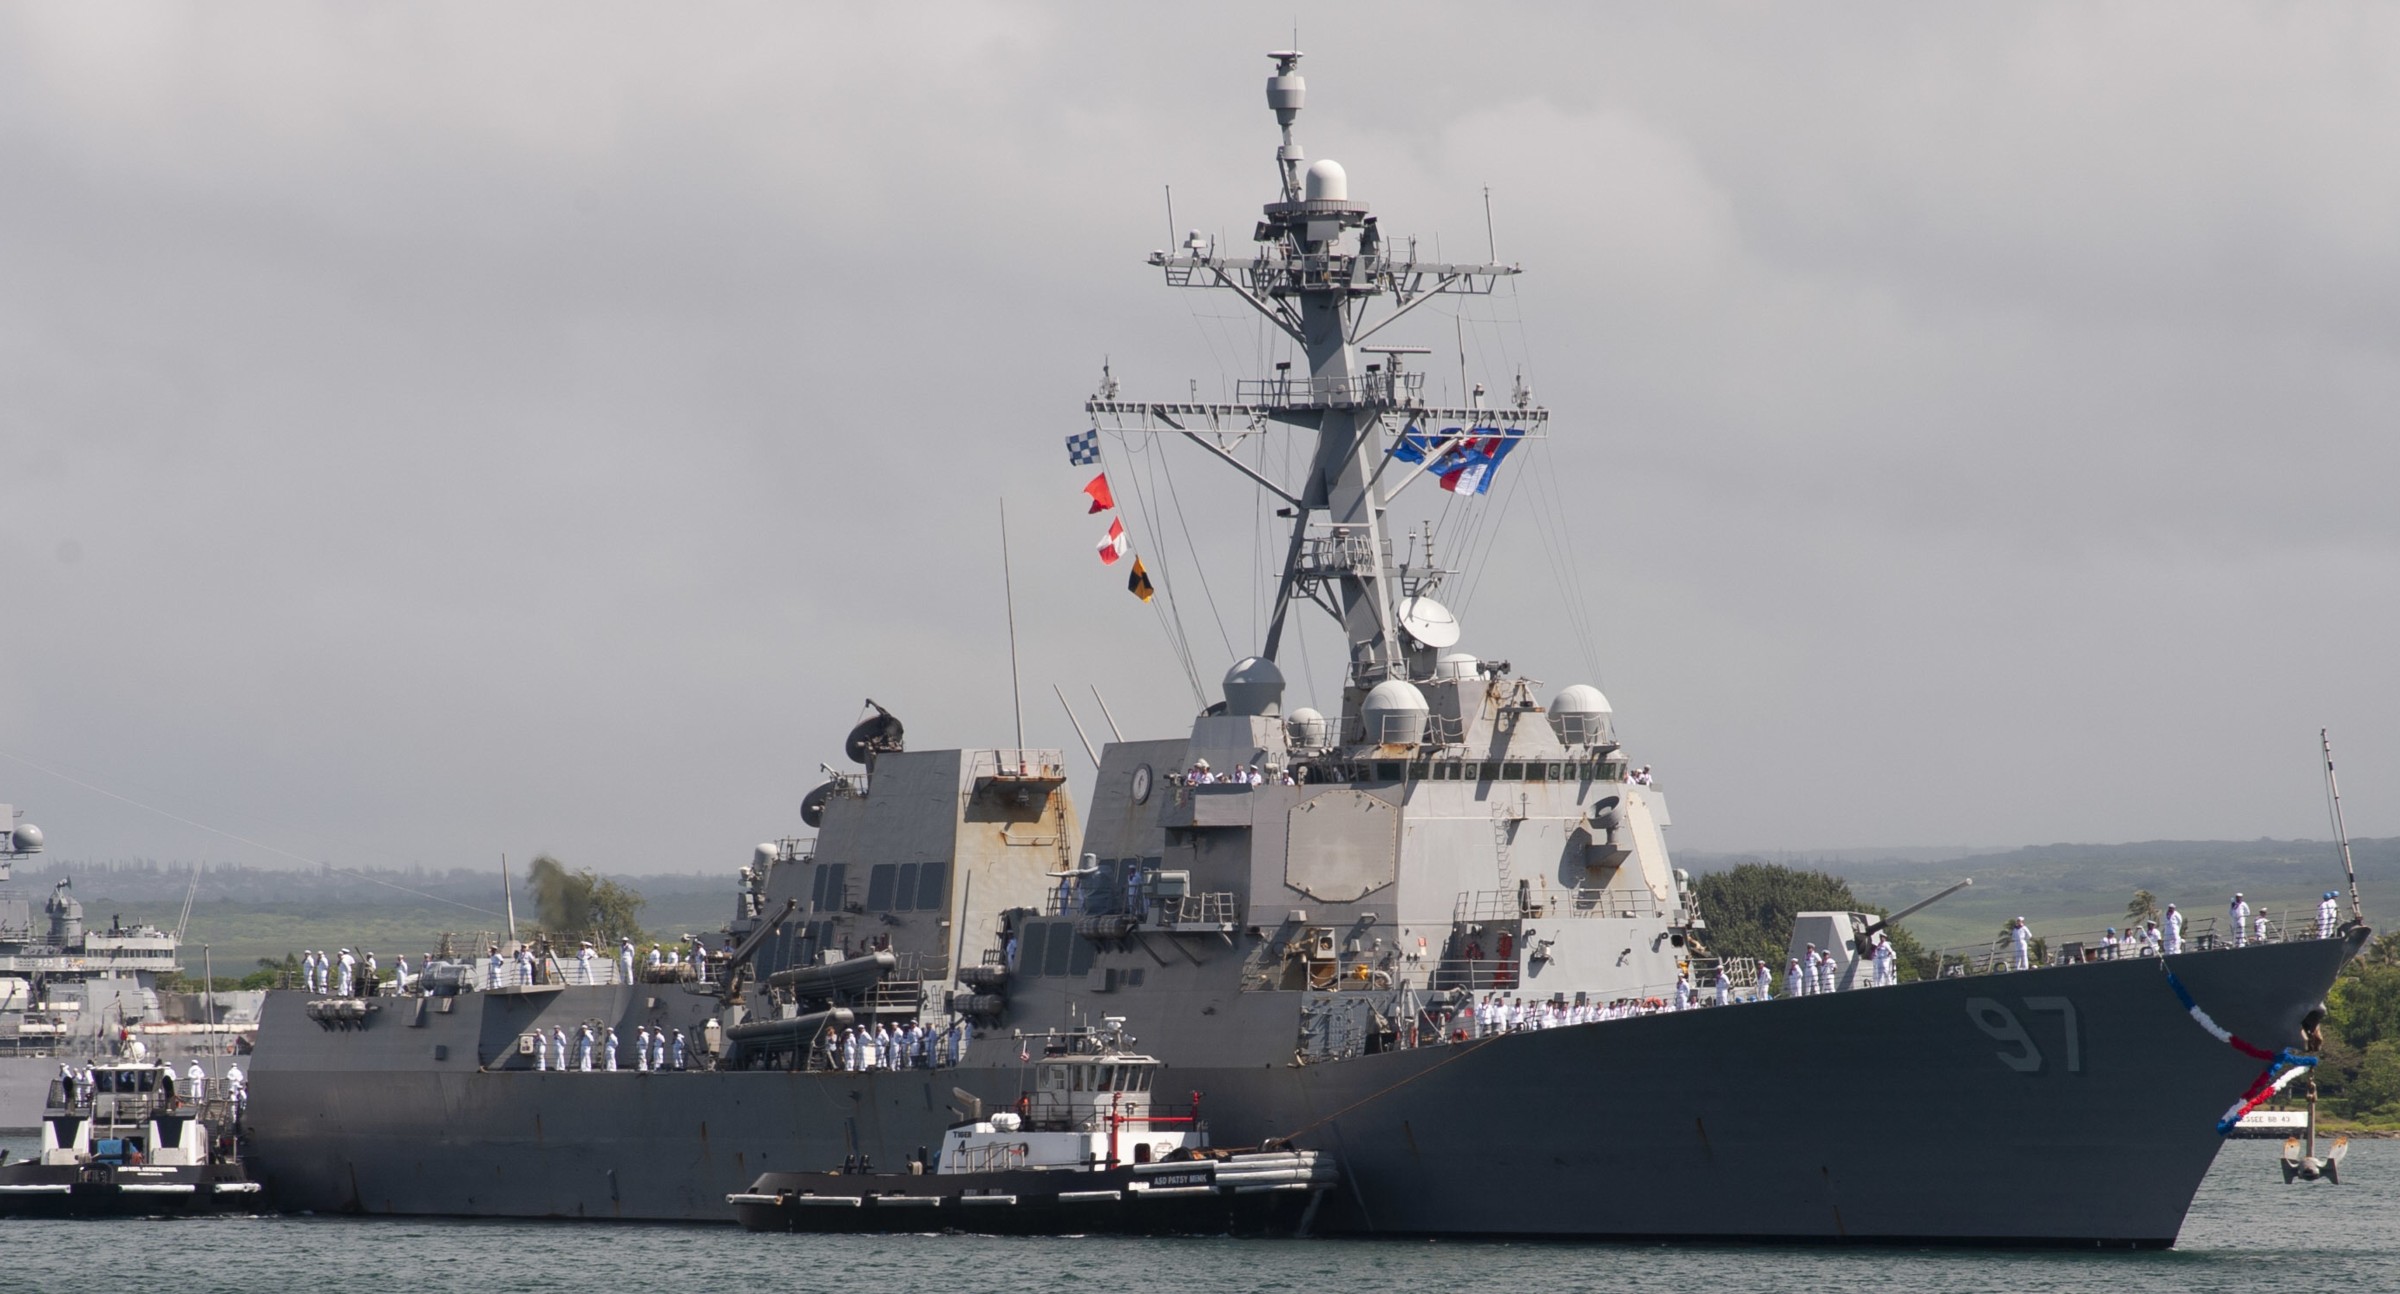 ddg-97 uss halsey arleigh burke class guided missile destroyer joint base pearl harbor-hickam hawaii 62